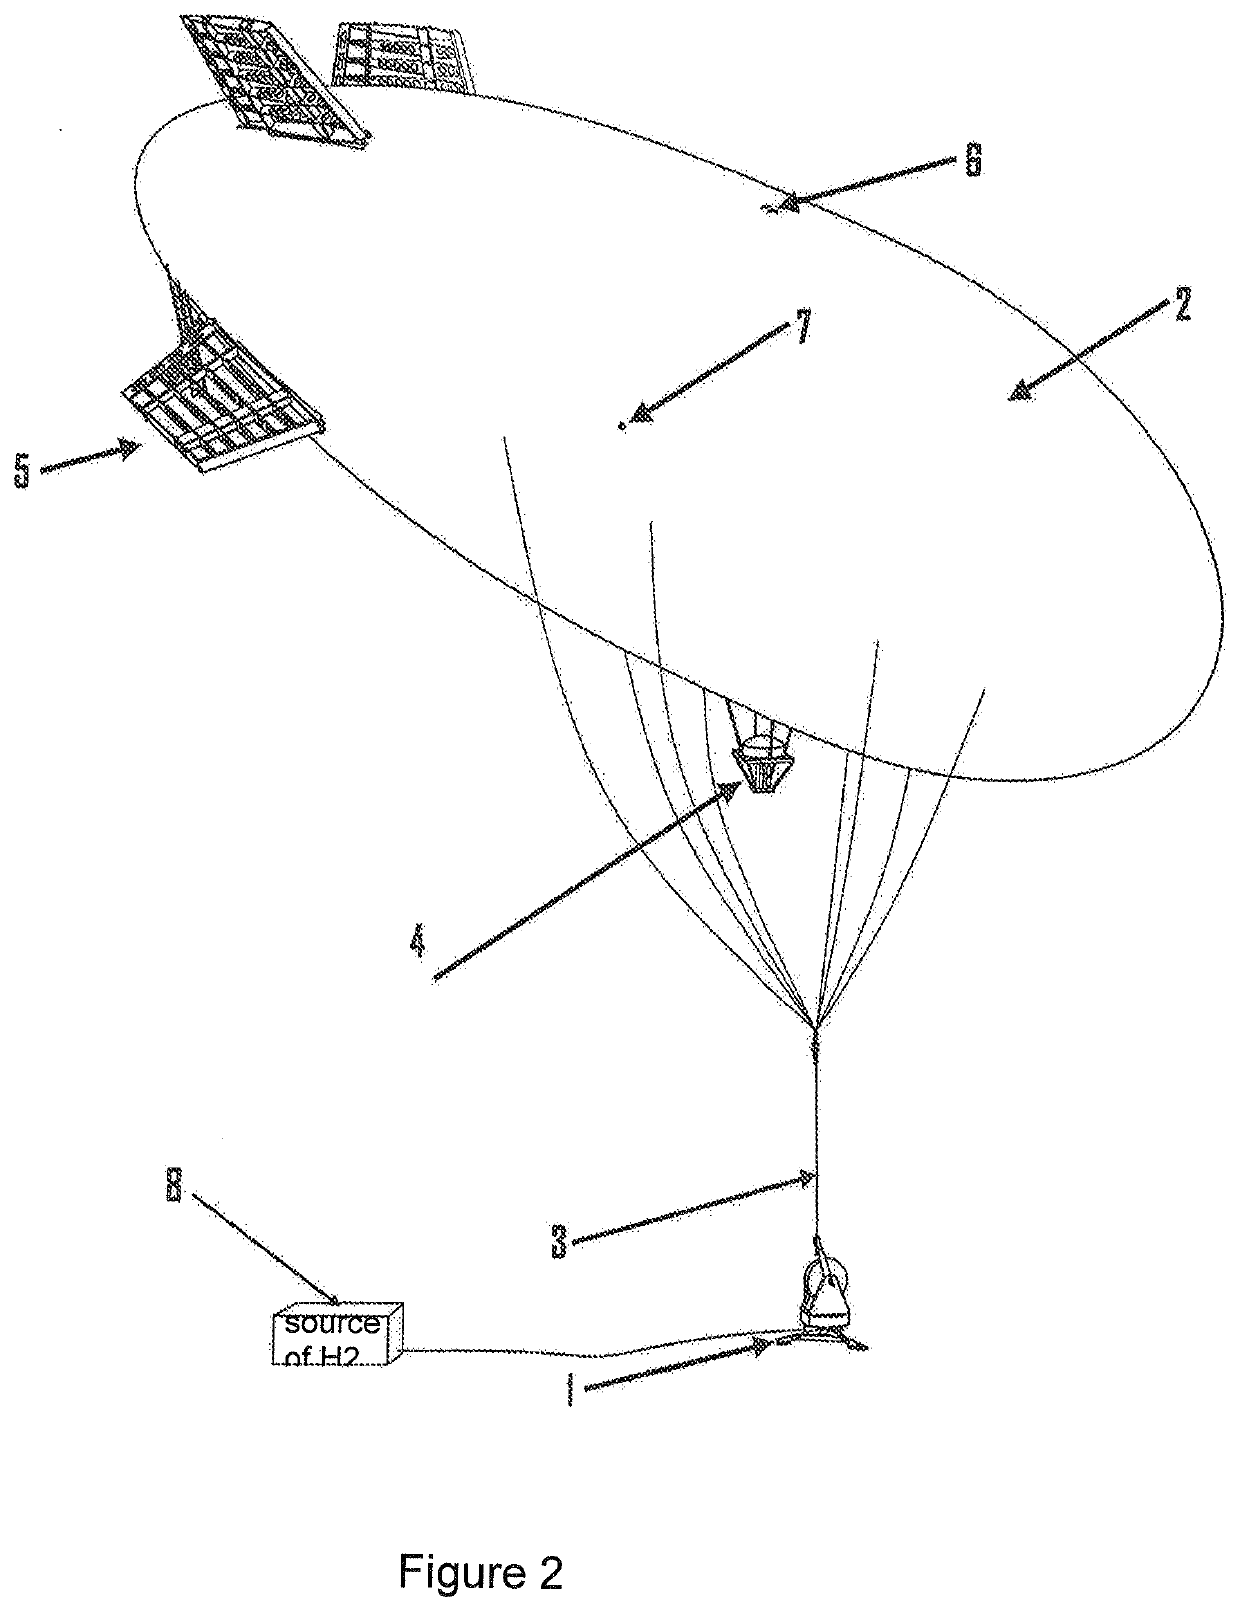 Tethered aerial system and tether cable